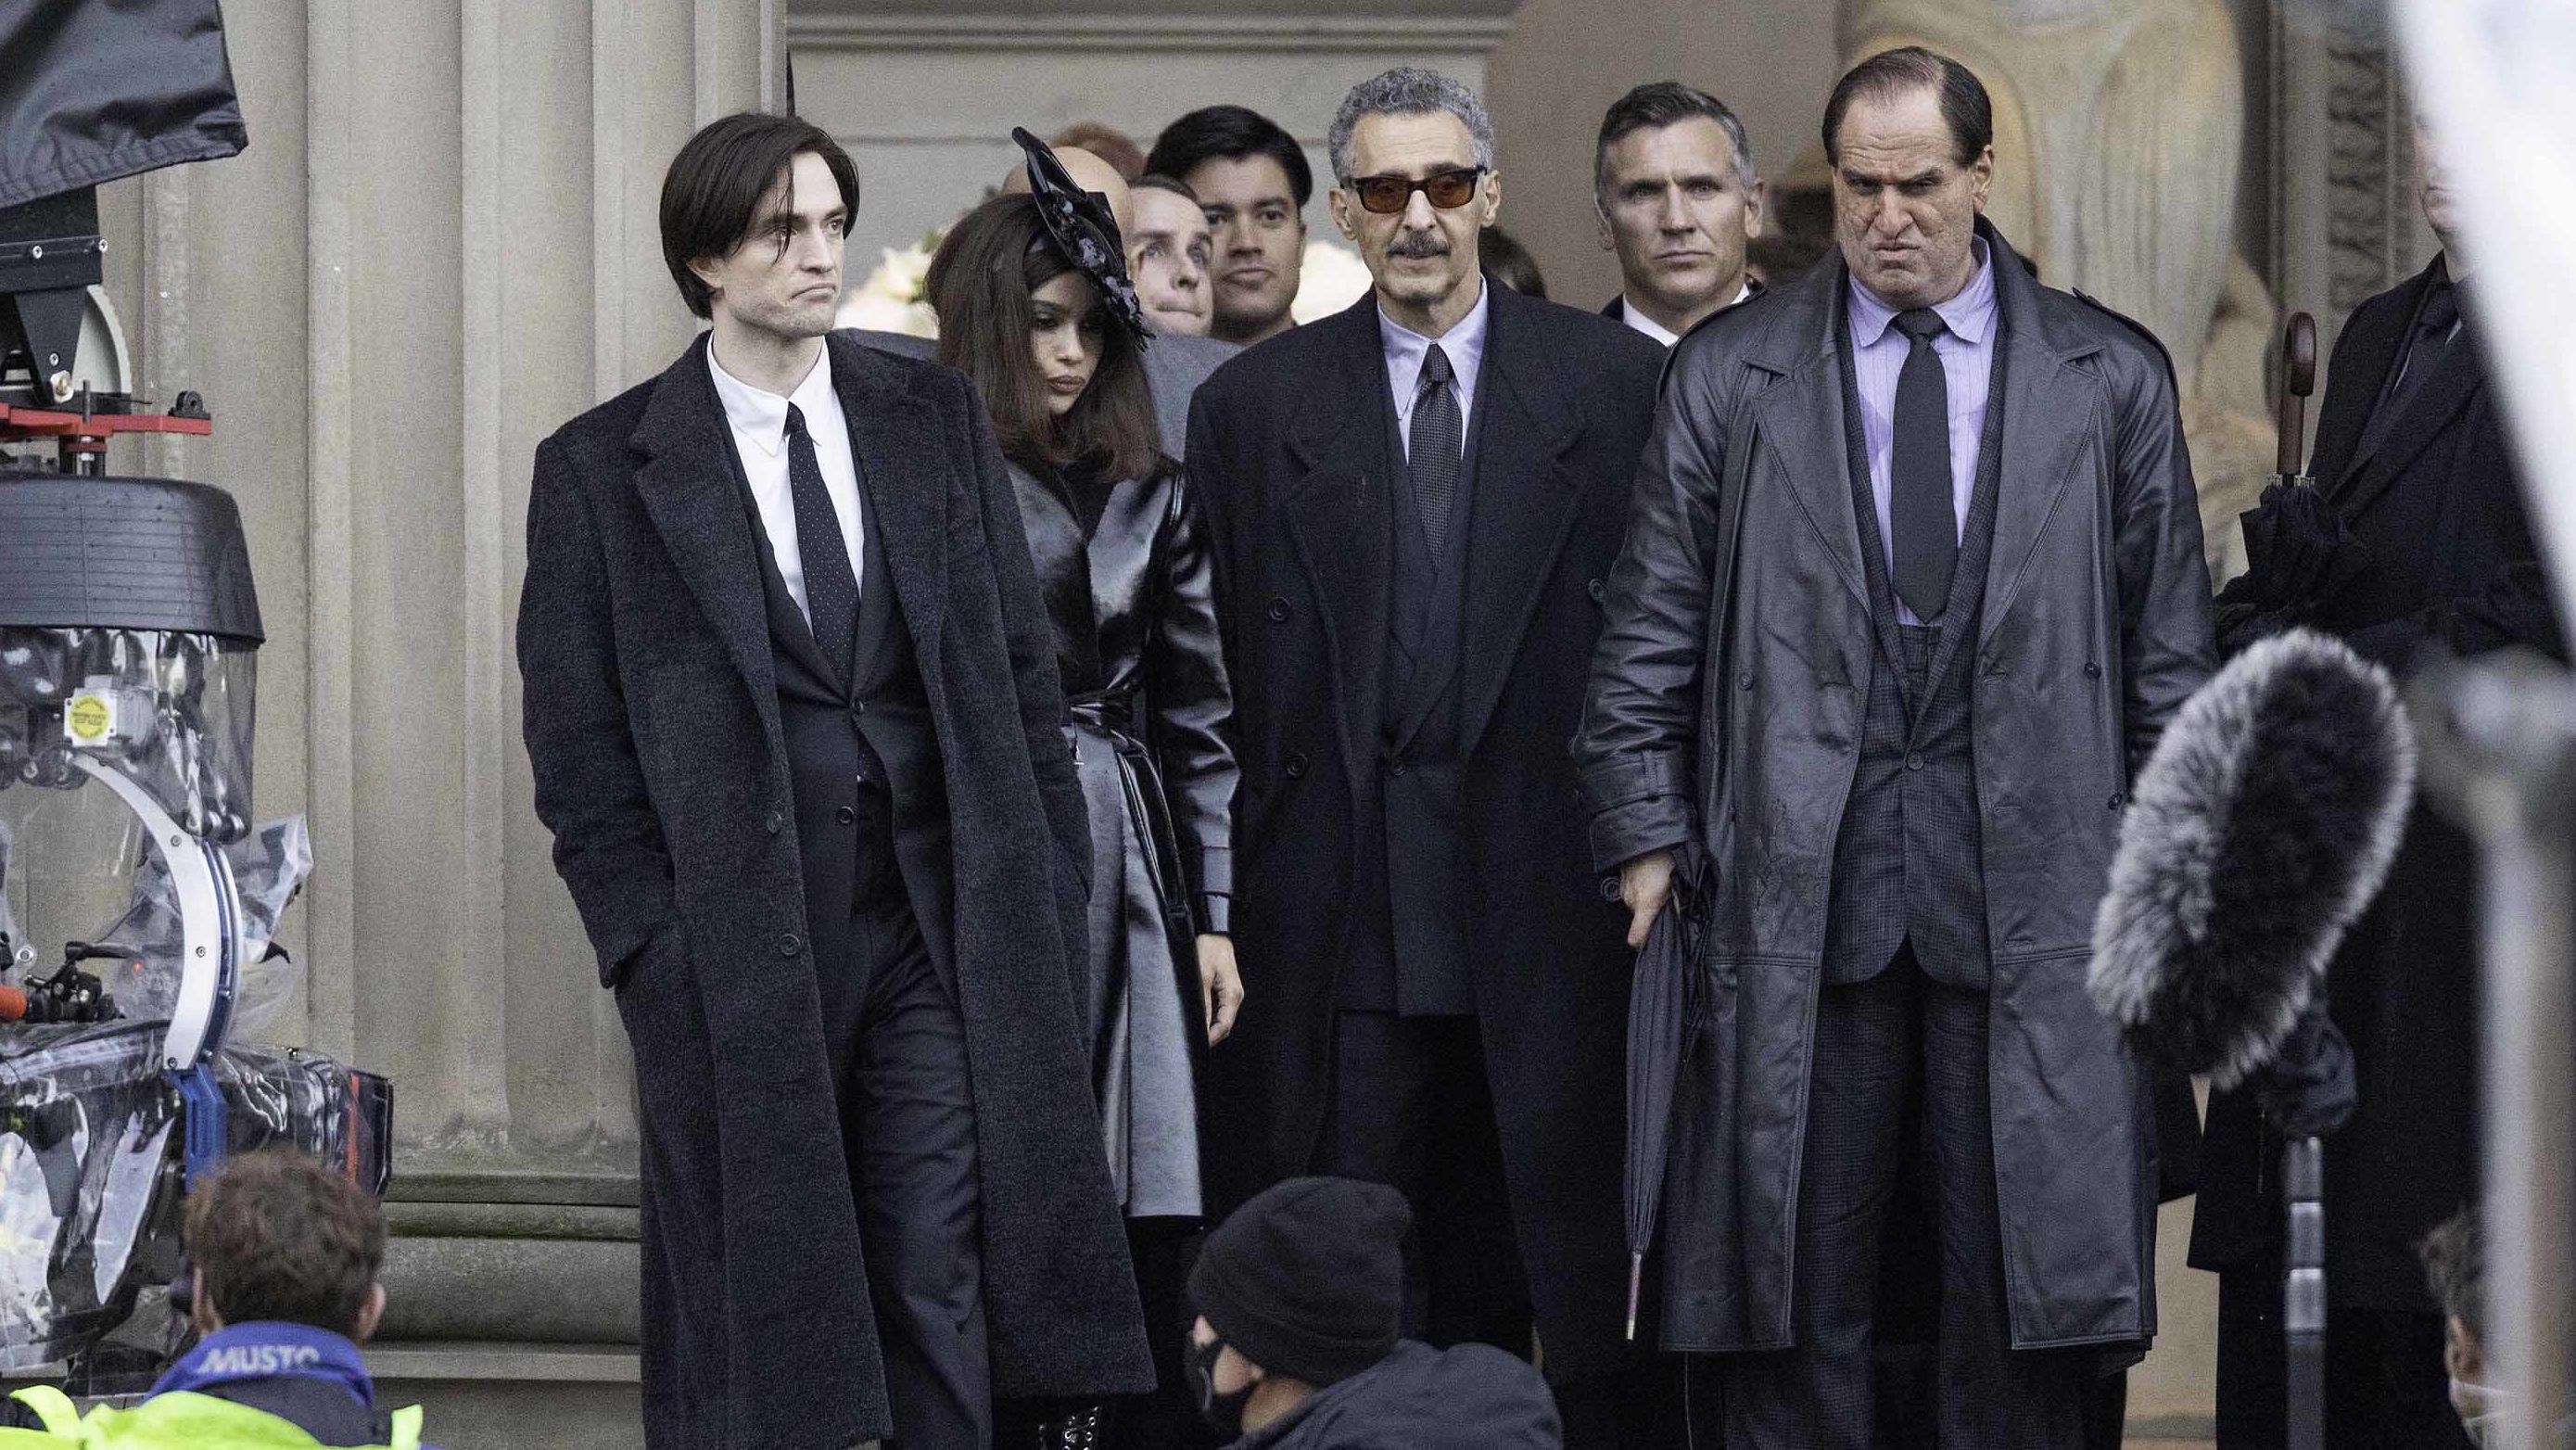 Robert Pattinson Zoe Kravitz, John Turturro with Colin Farrell wearing prosthetic makeup as he plays The Penguin film the new Batman movie on October 12, 2020 in Liverpool, England. (Photo by MEGA/GC Images)